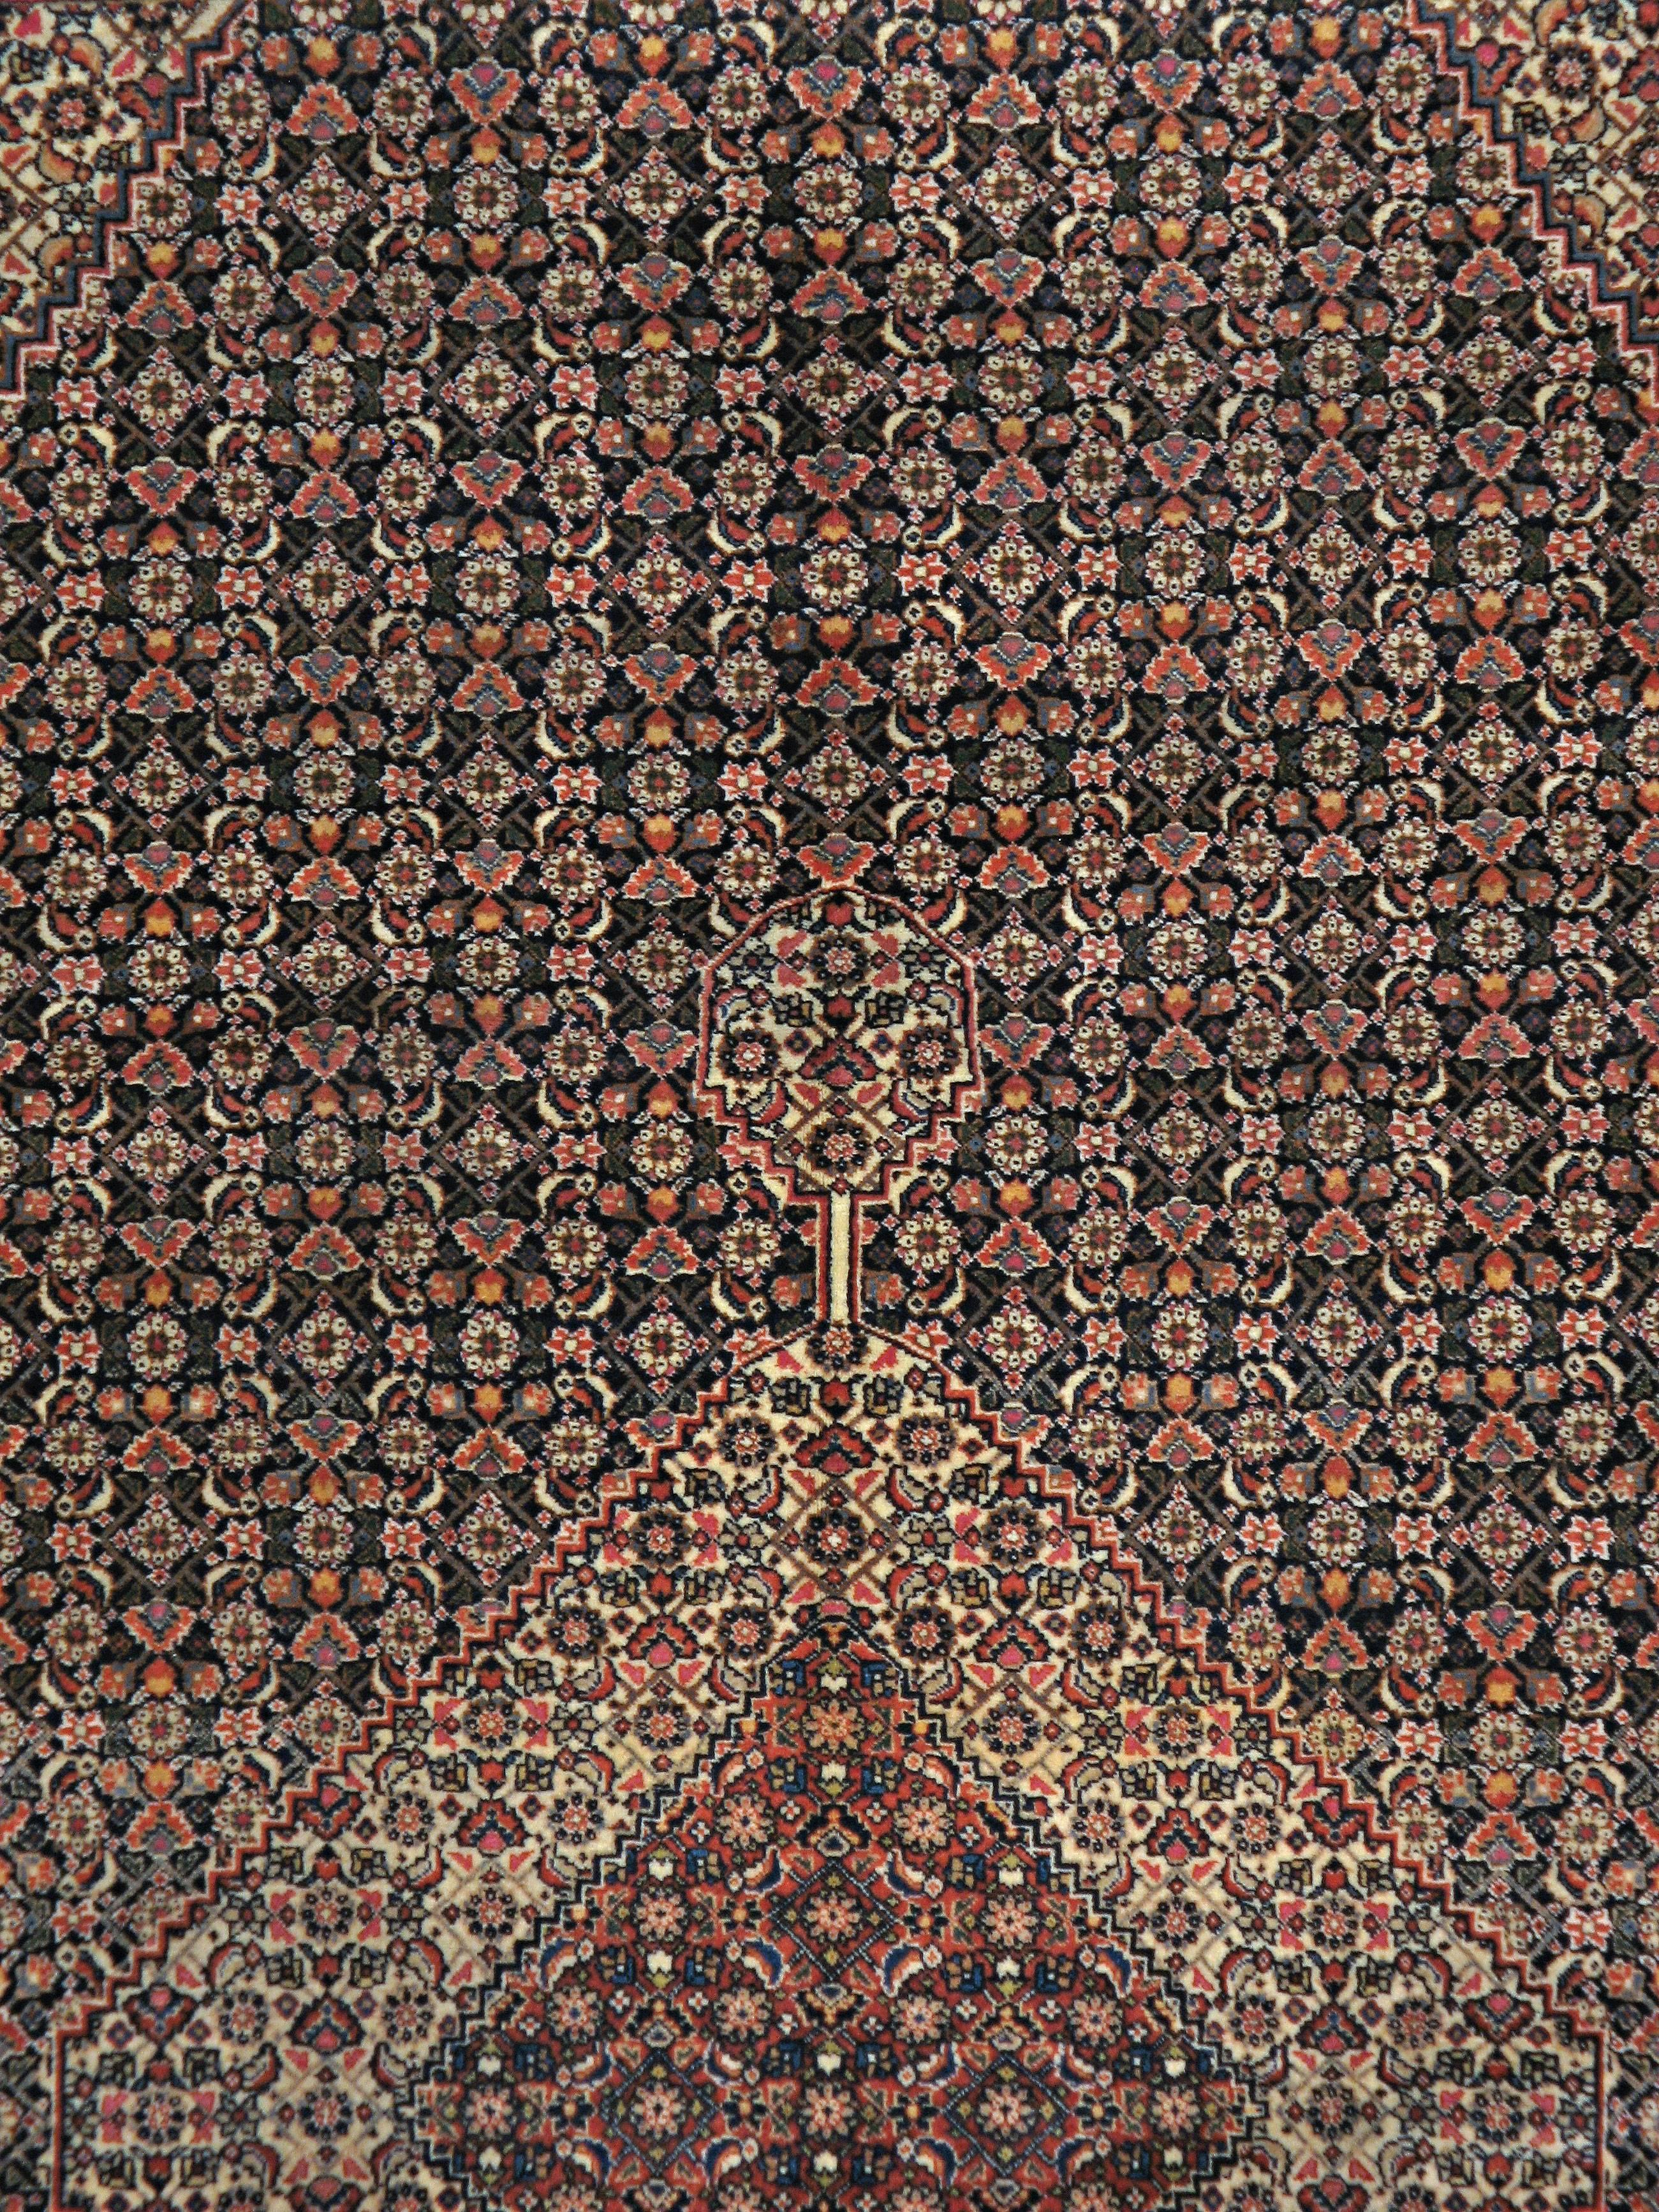 An antique Persian Tabriz carpet from the second quarter of the 20th century.